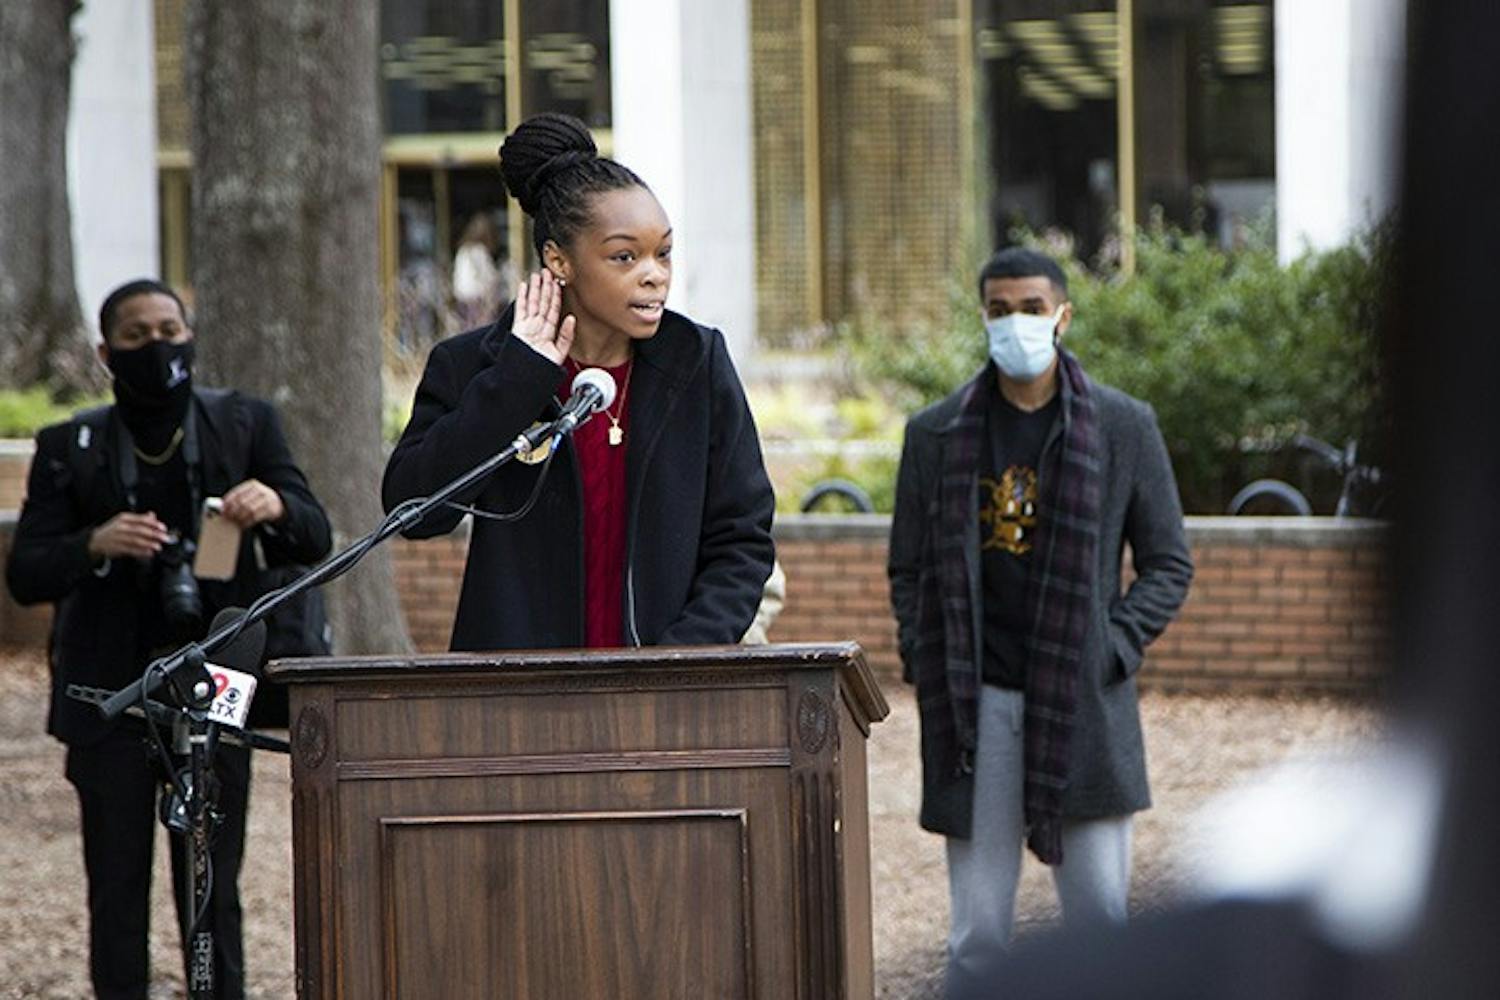 USC's NAACP chapter President Caley Bright gives a speech at the Aim to Rename press conference on Feb. 17, 2021.&nbsp;